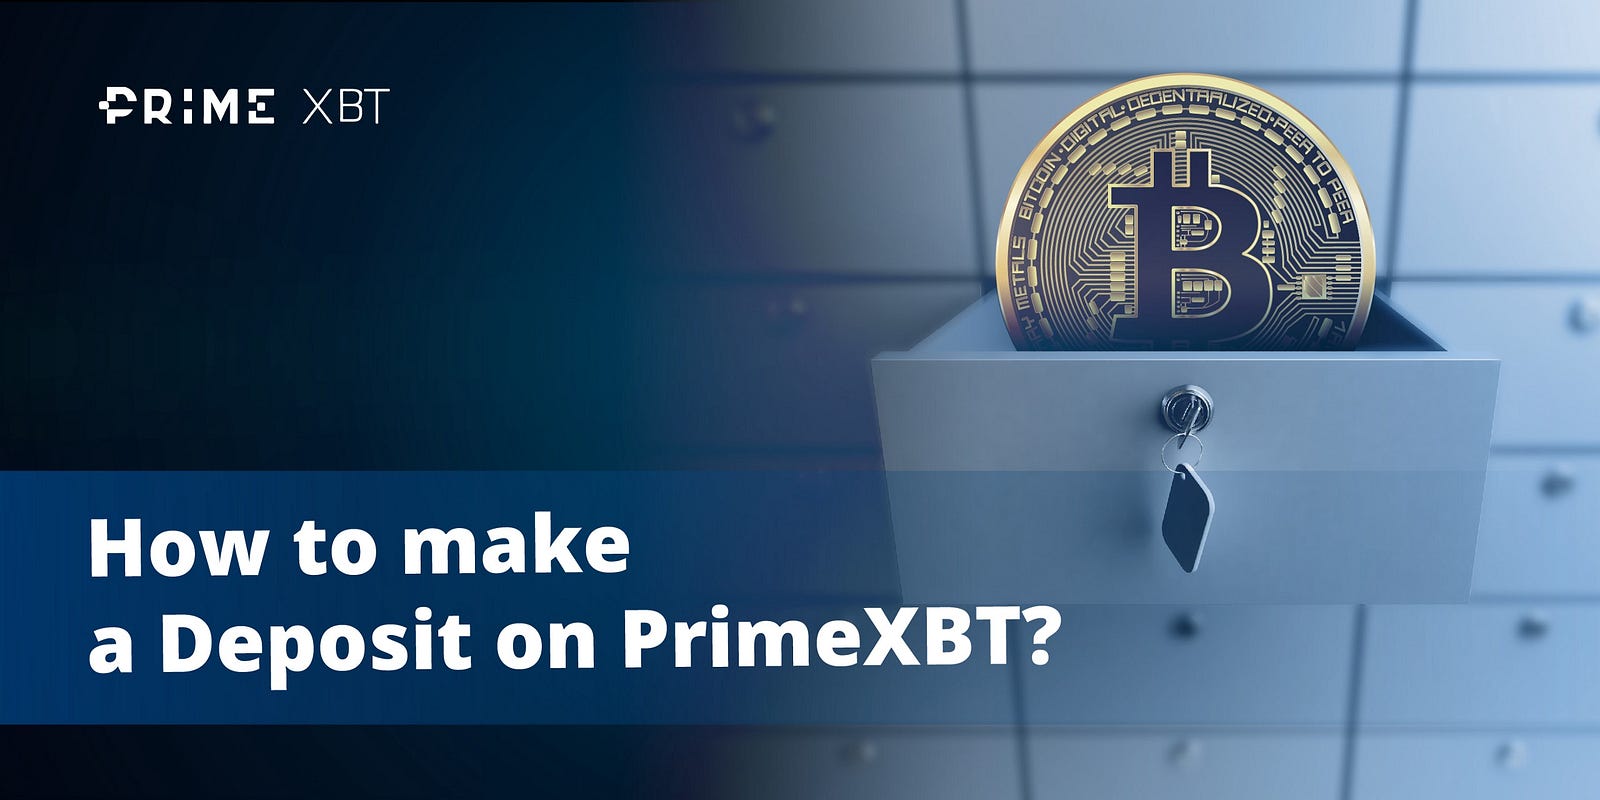 PrimeXBT Trading Guide - Prime XBT™ - Crypto, FX, CFD's ...